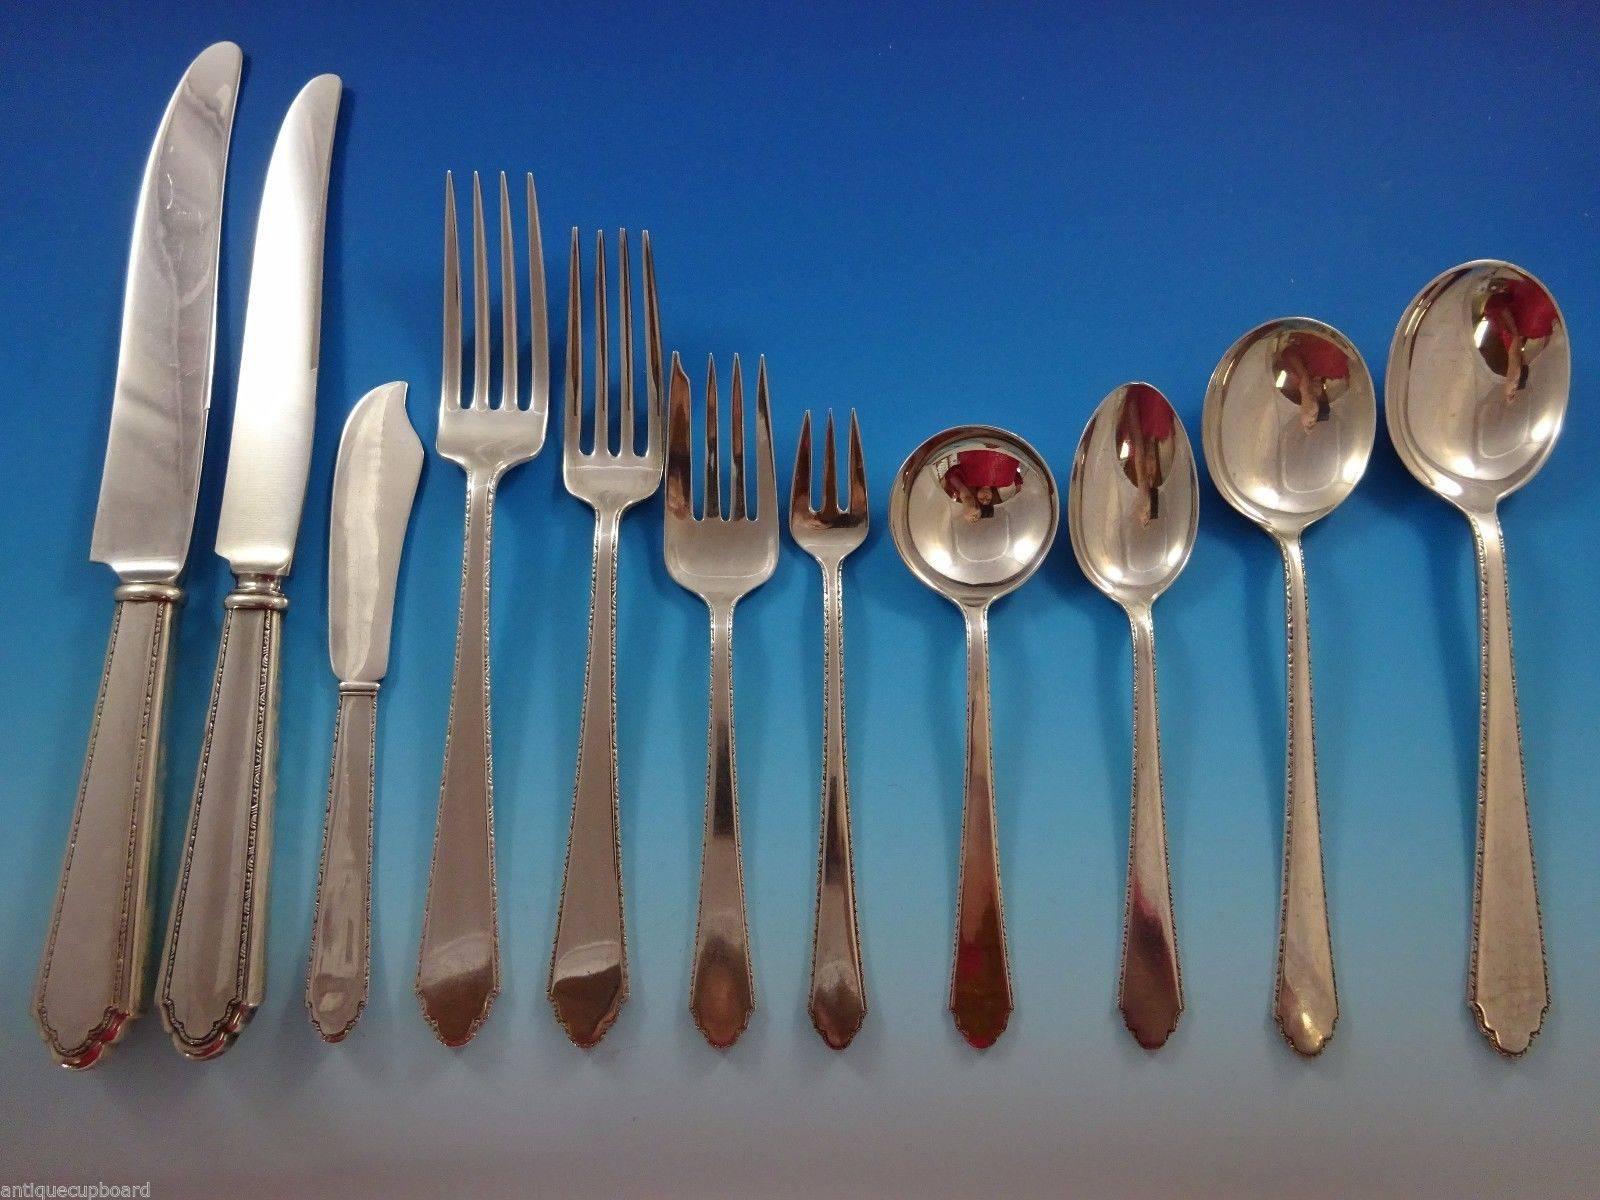 Huge William & Mary by Lunt sterling silver flatware set of 140 Pieces. This set includes:

12 dinner size knives, 9 1/2